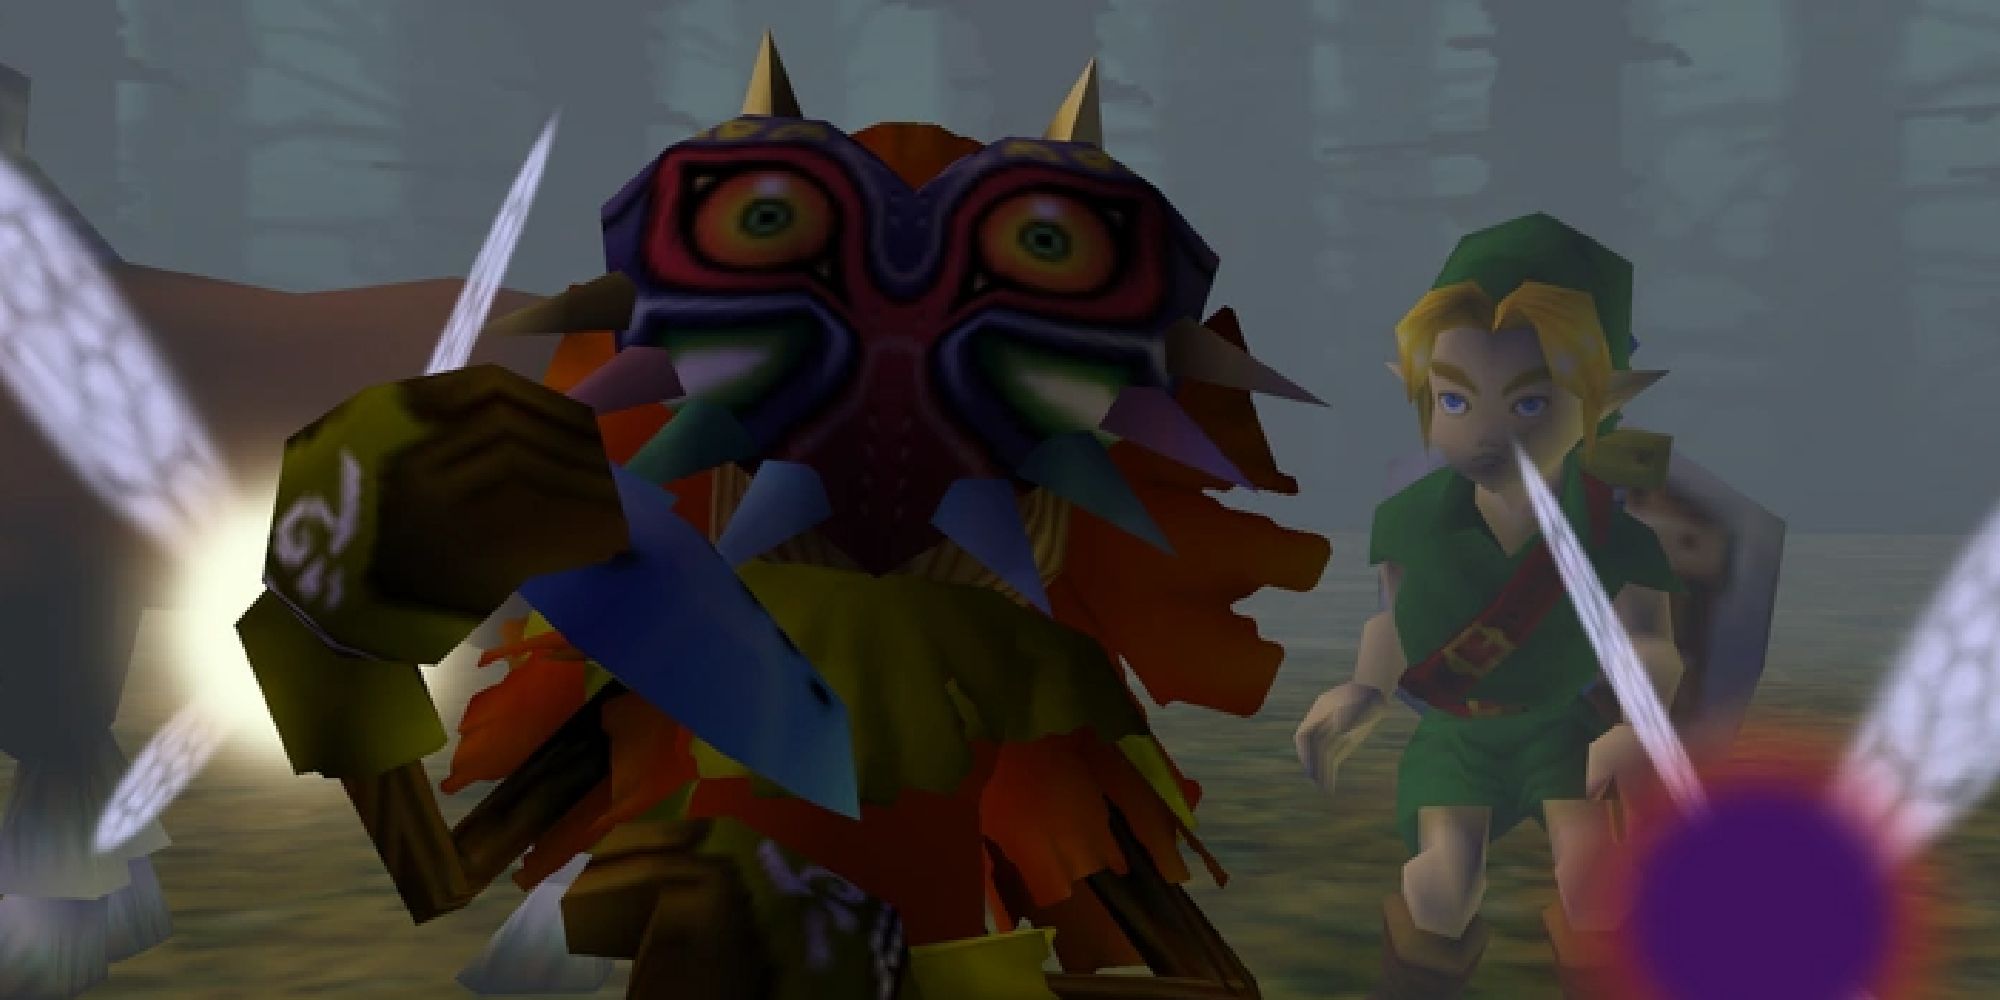 Skull Kid holding the ocarina of time in front of Link and Epona, standing next to Tatl and Tael.